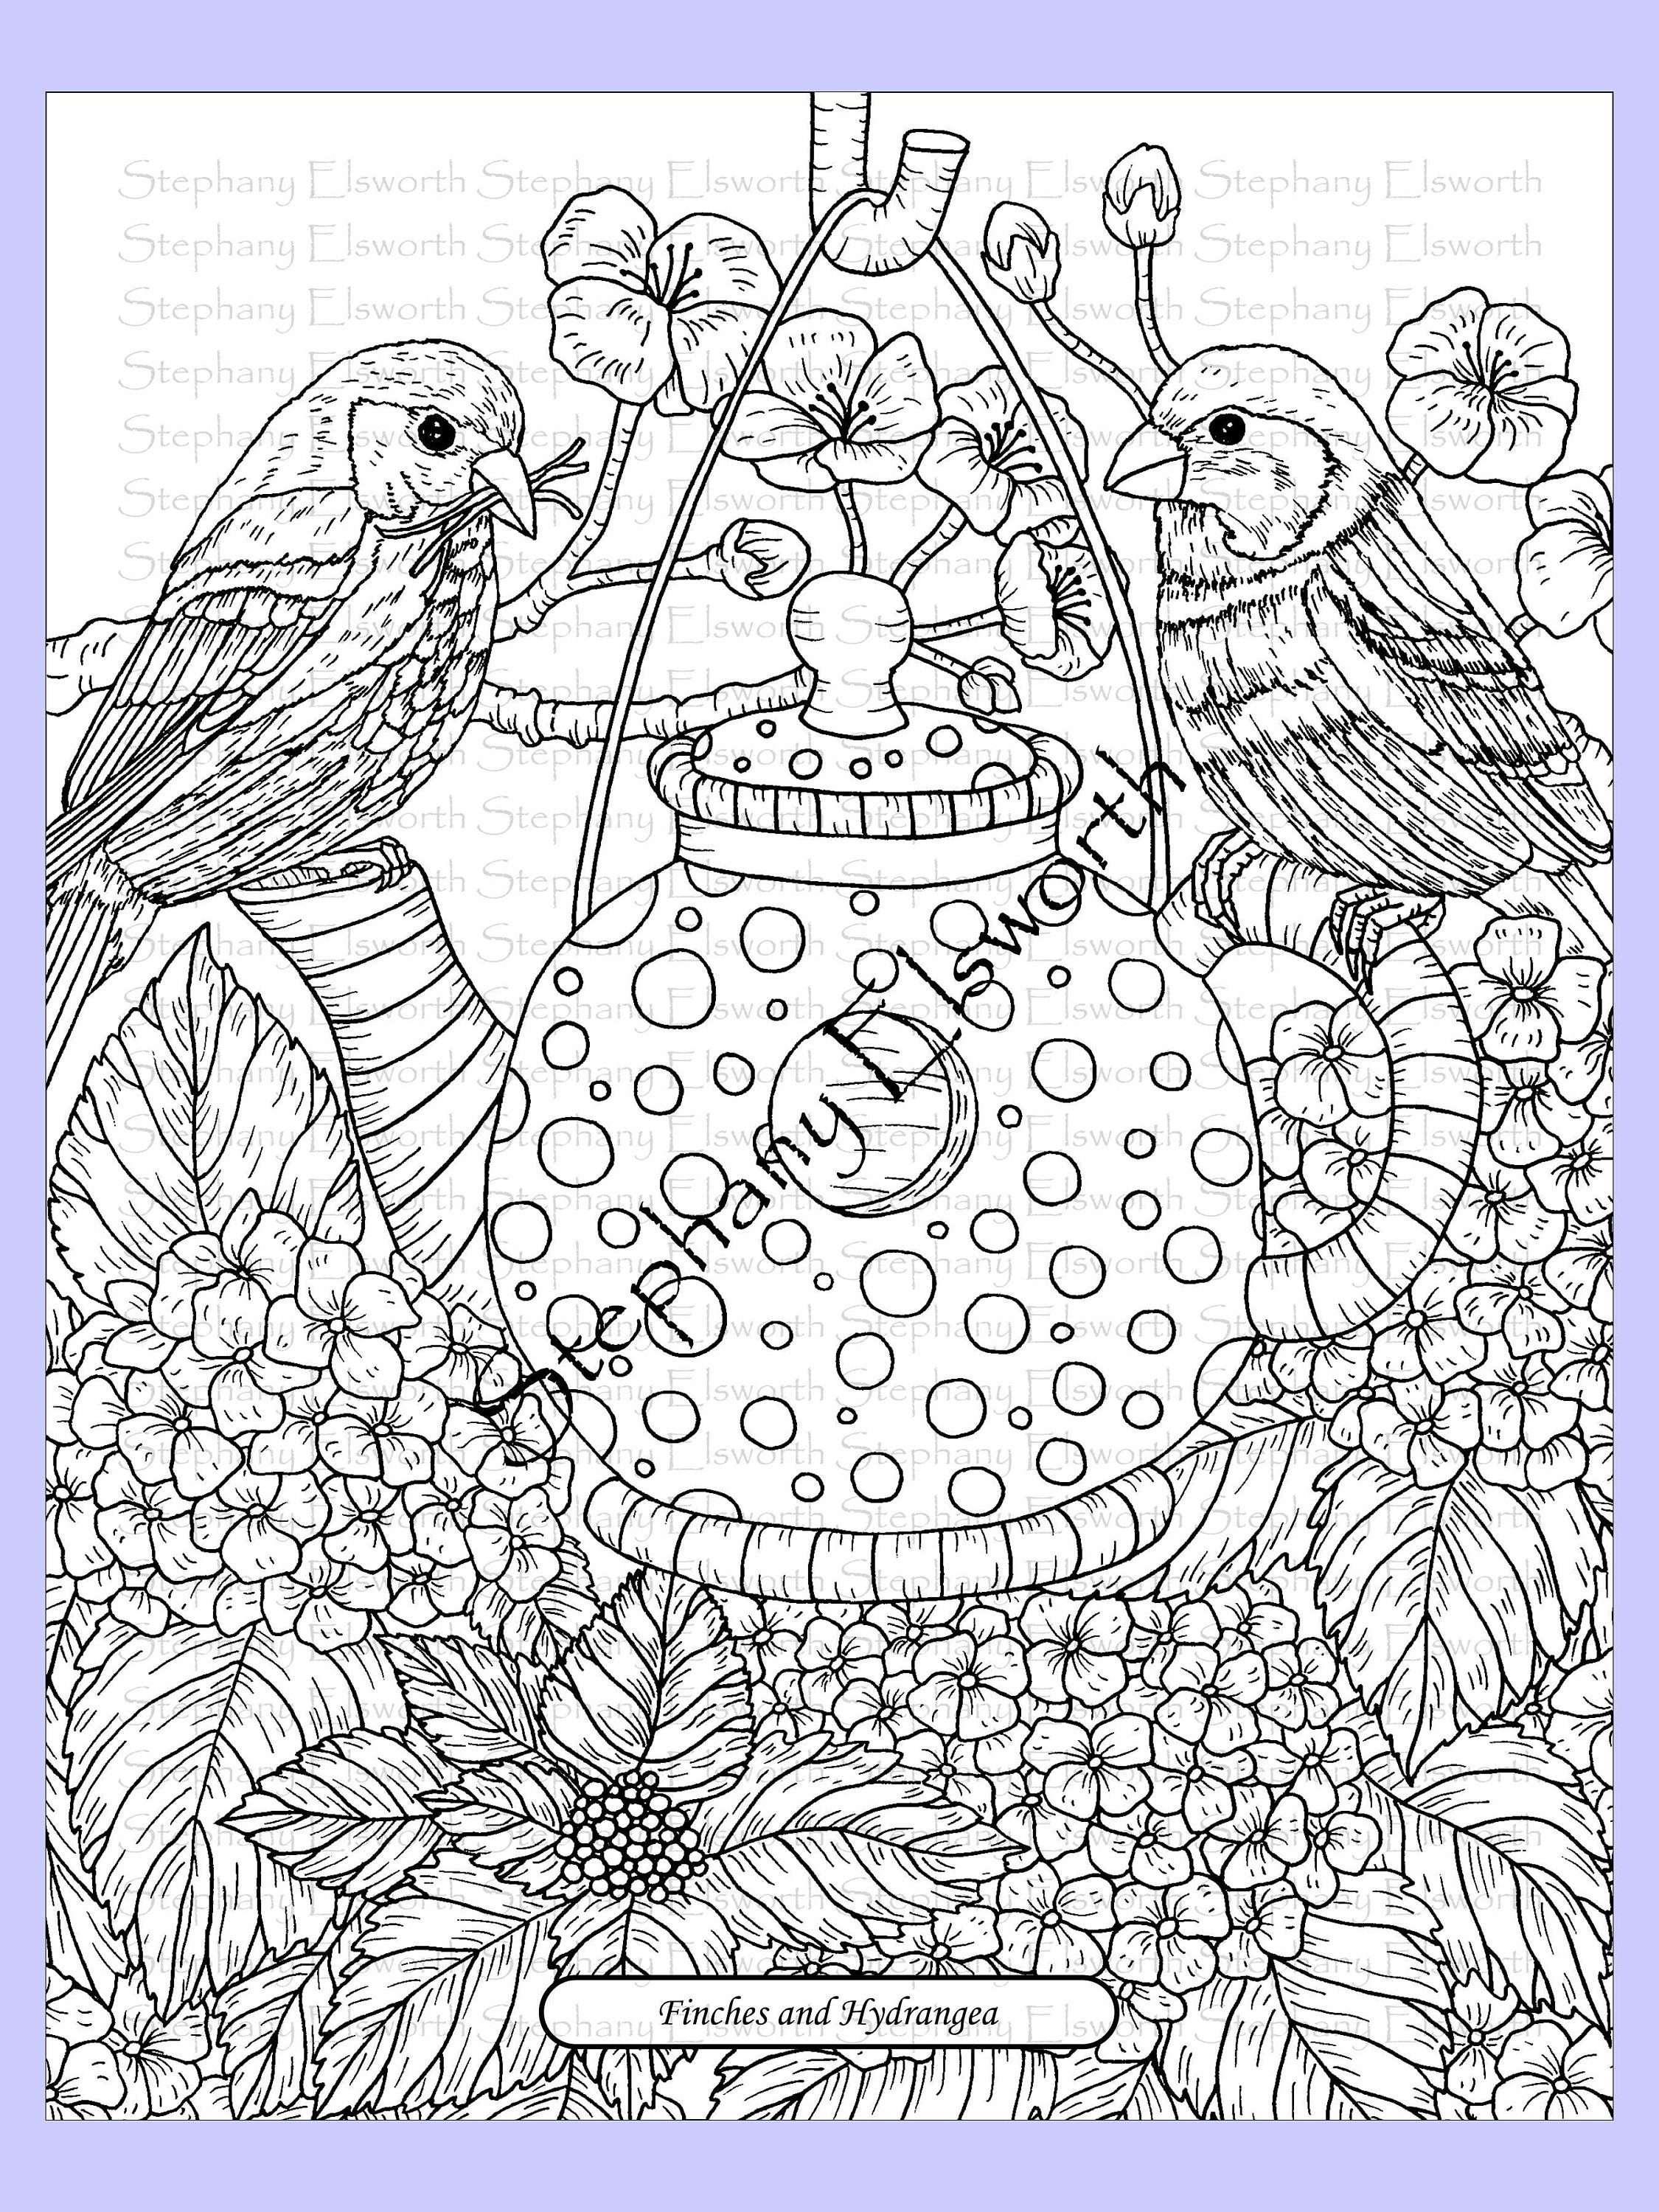 Blossoms and Birds 25 Page 8 1/2 x 11 PDF Coloring Book | Etsy